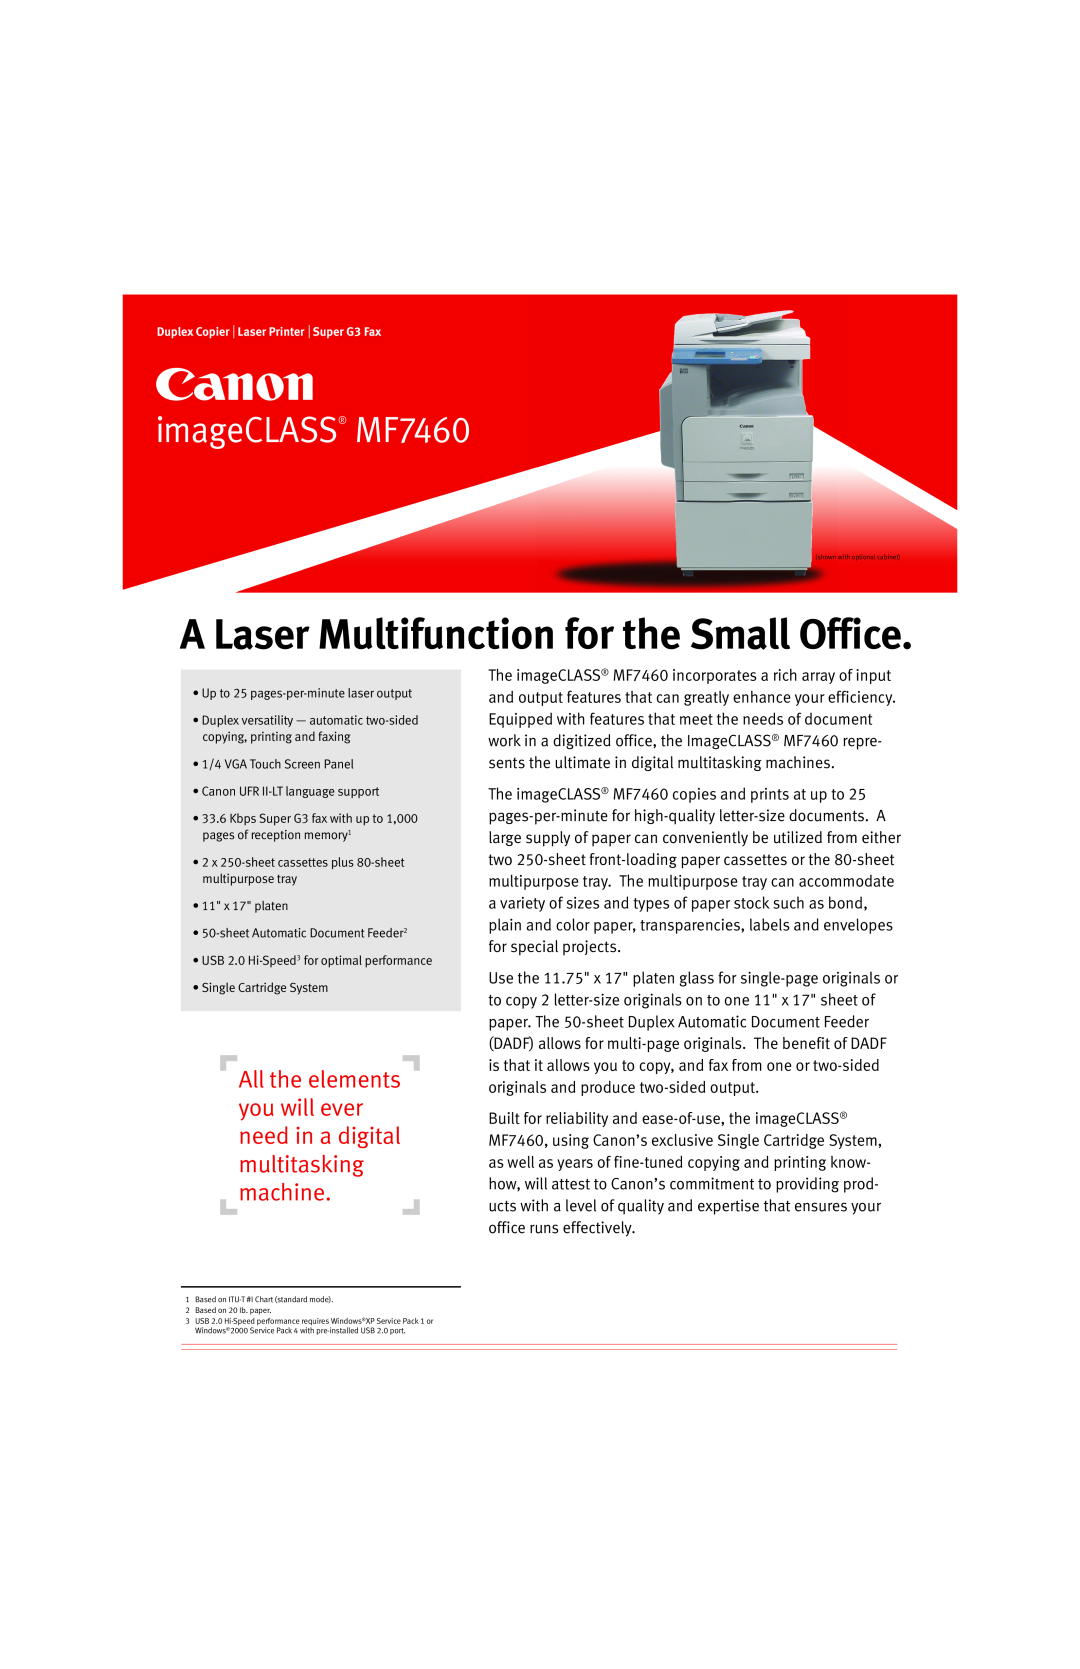 Canon manual A Laser Multifunction for the Small Office, imageCLASS MF7460 